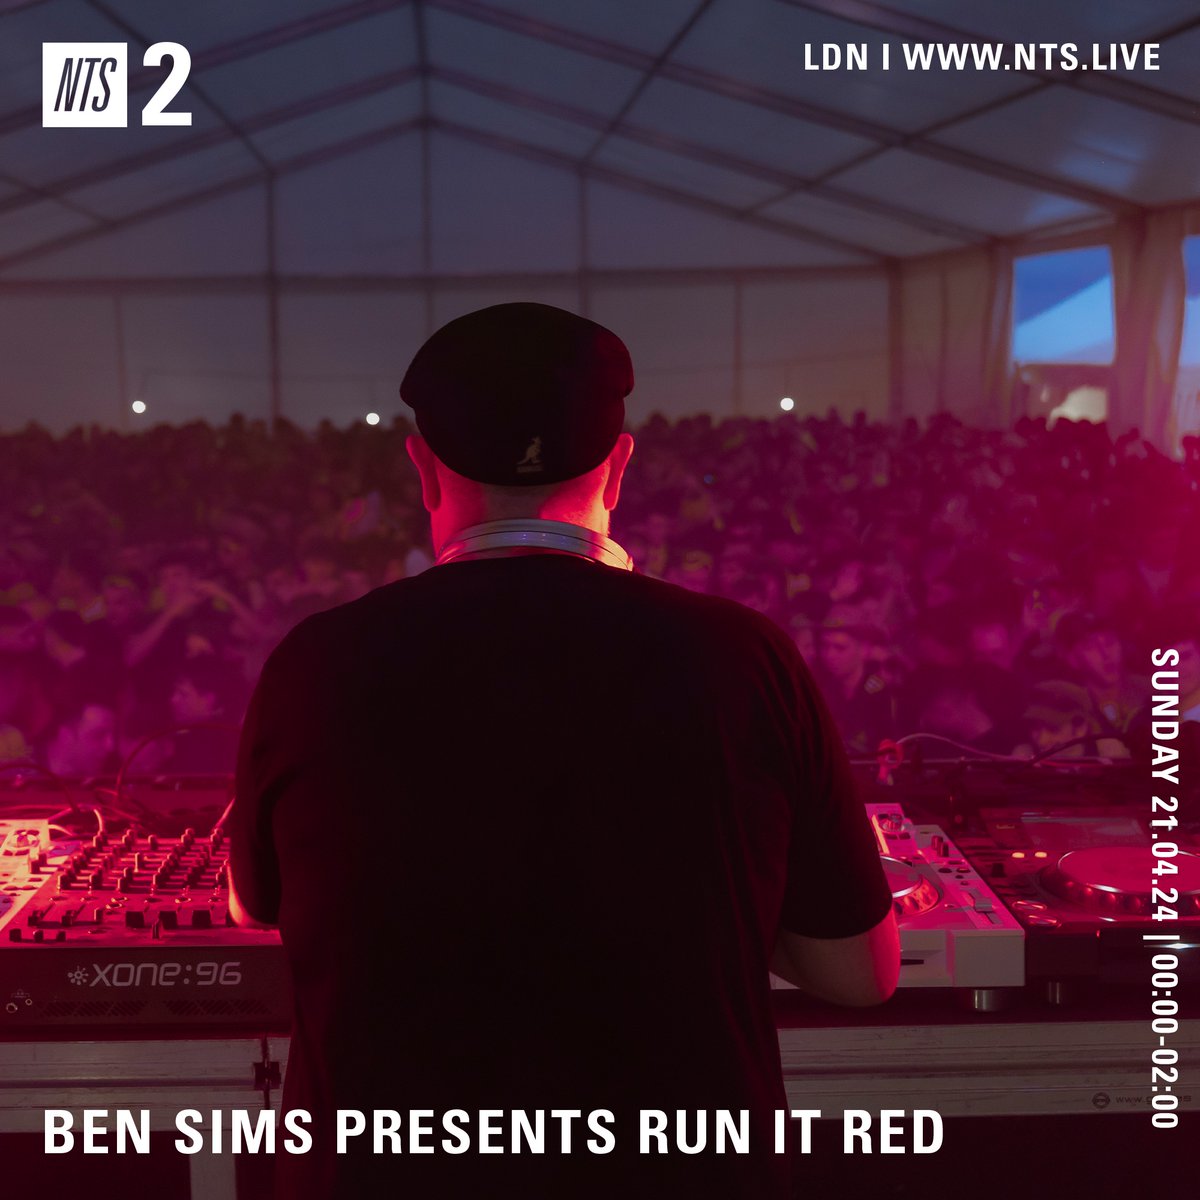 Run it Red's back tonight on @NTSlive. Another two hours of fresh music that's come my way since the last show - you know the drill. Heat this month from ANNĒ, Robert Hood, Kerrie, Gary Beck, DJ Godfather, Justine Perry and loads more. Tune in to check it out at midnight UK BST